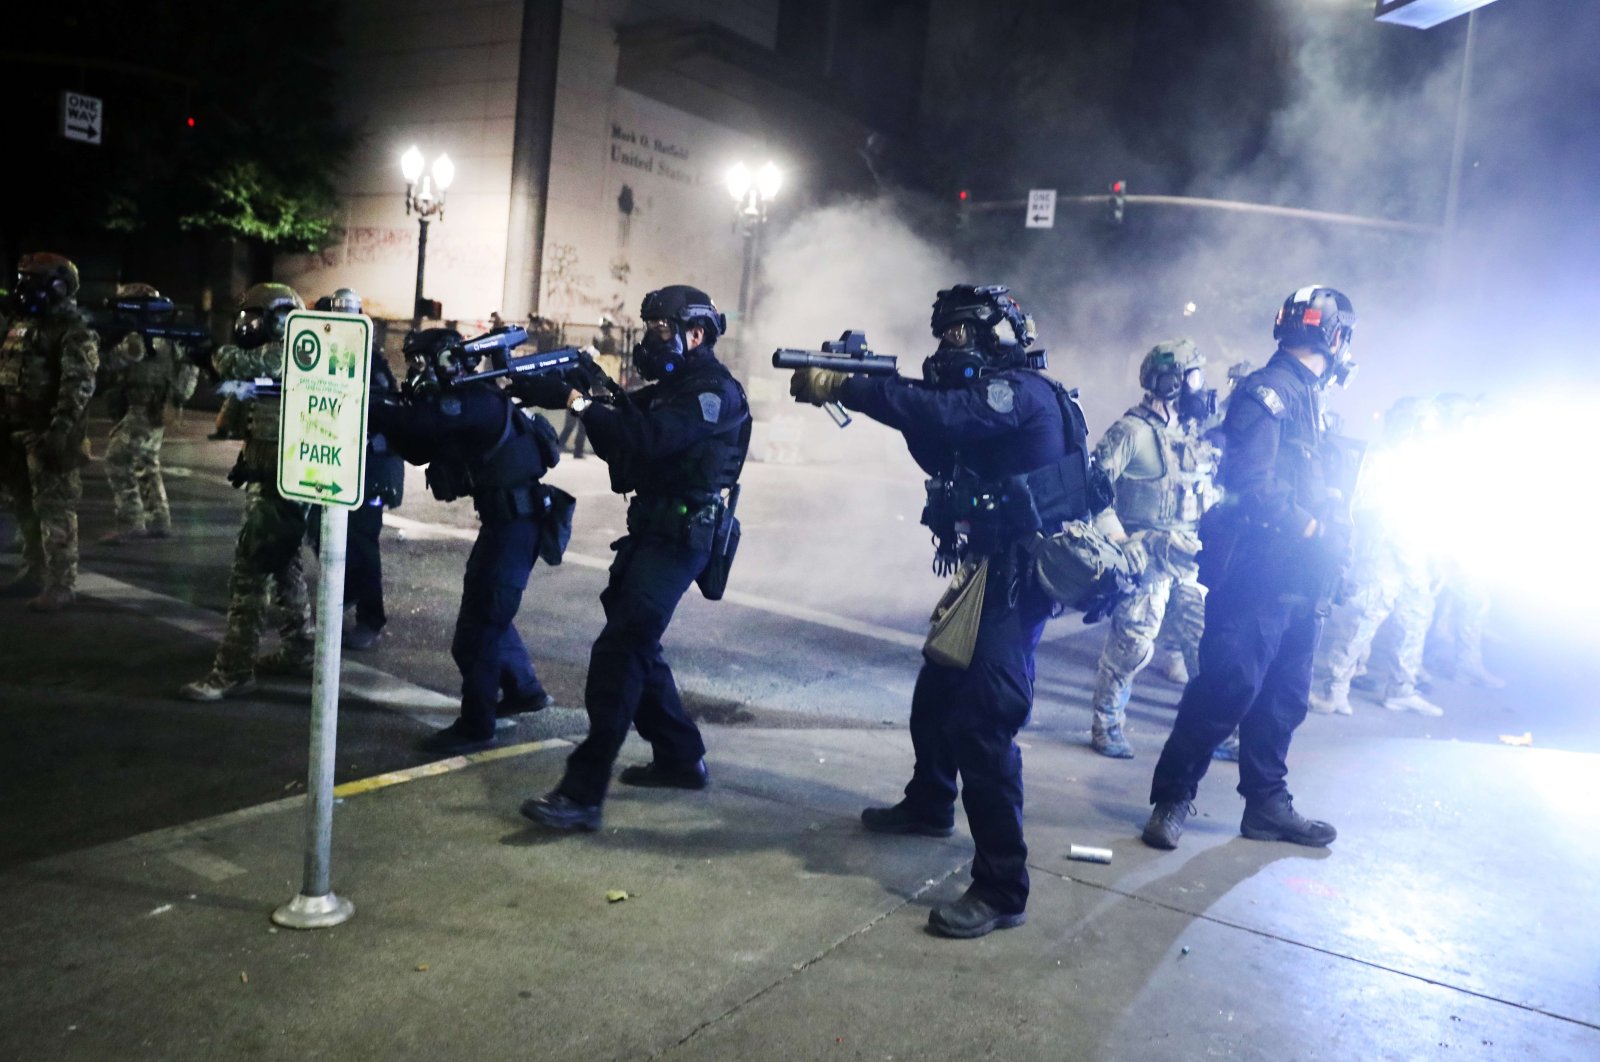 Federal police face off with protesters in a rally in Portland, Oregon, July 27, 2020. (AFP PHOTO)